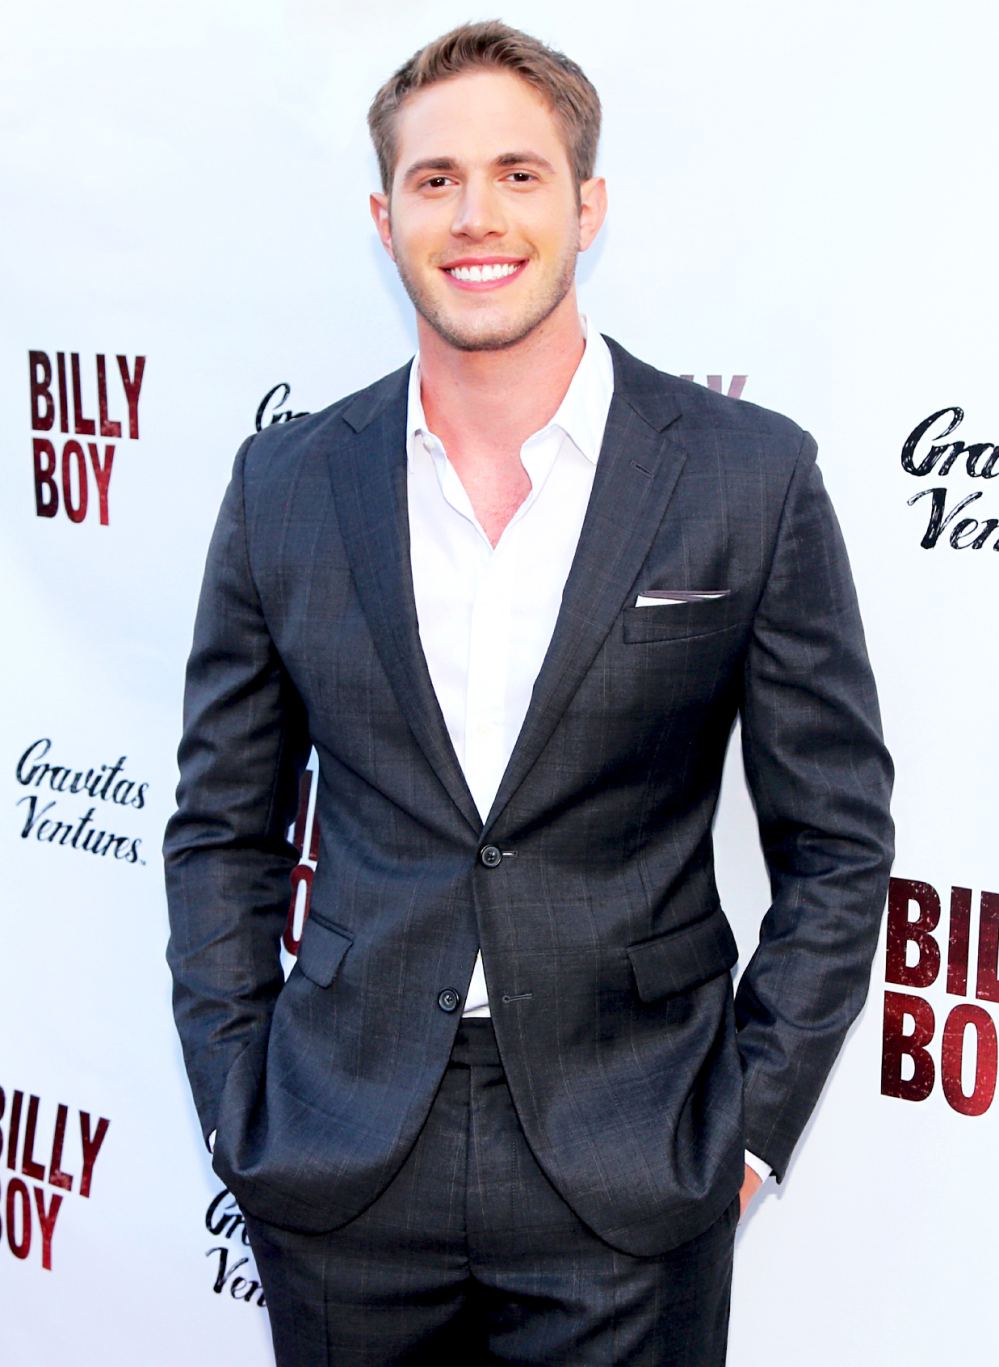 Blake Jenner arrives at the Los Angeles premiere of 'Billy Boy' at the Laemmle Music Hall on June 12, 2018 in Beverly Hills, California.